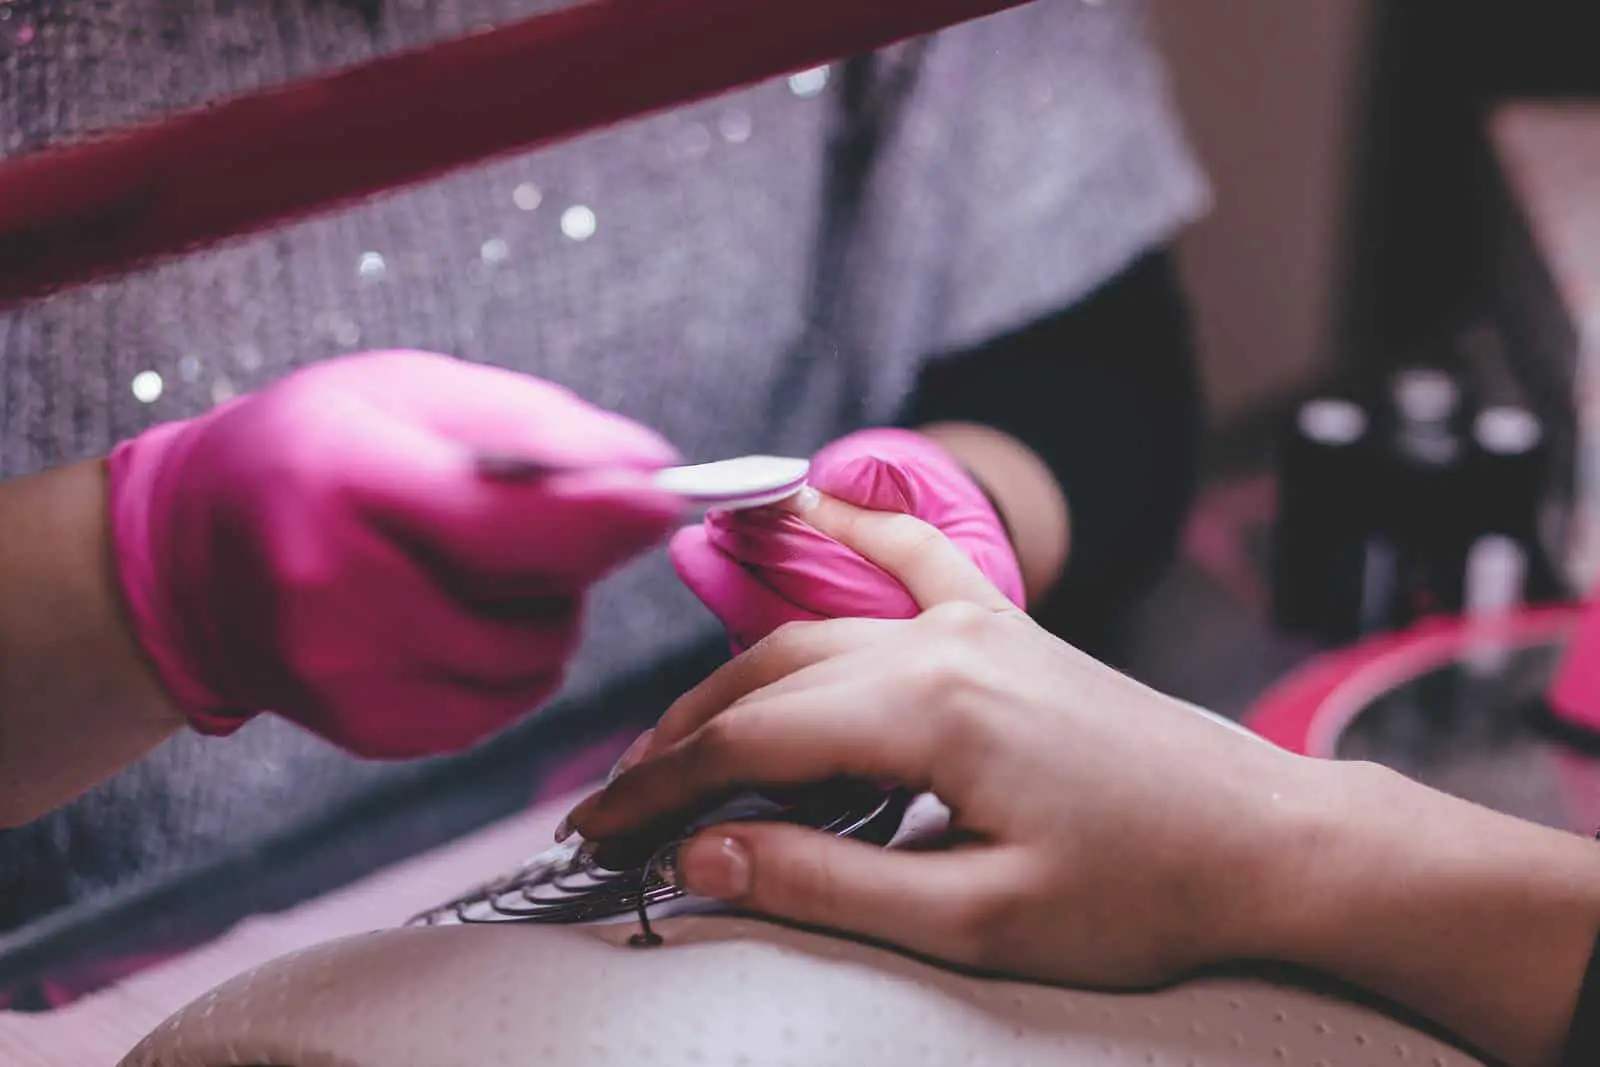 How long does it take to become a nail tech?